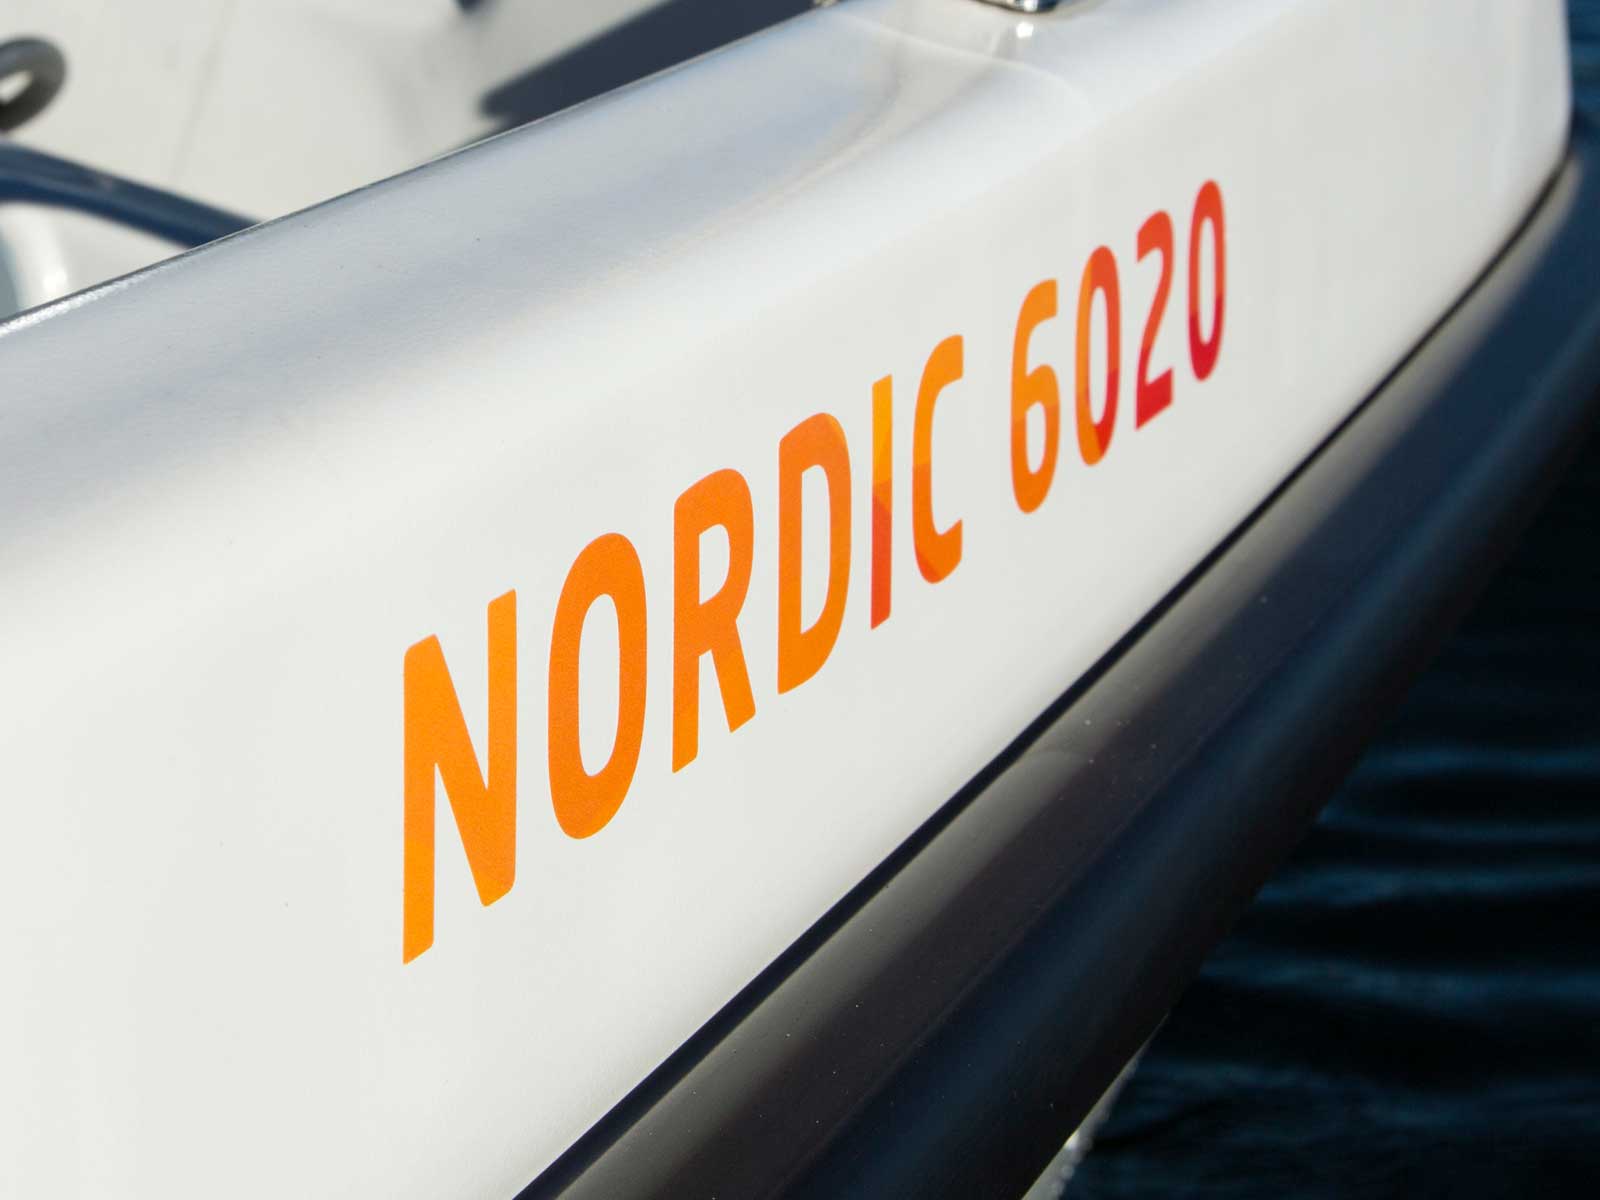 Terhi Nordic 6020 C | Boat Solutions, Utting am Ammersee